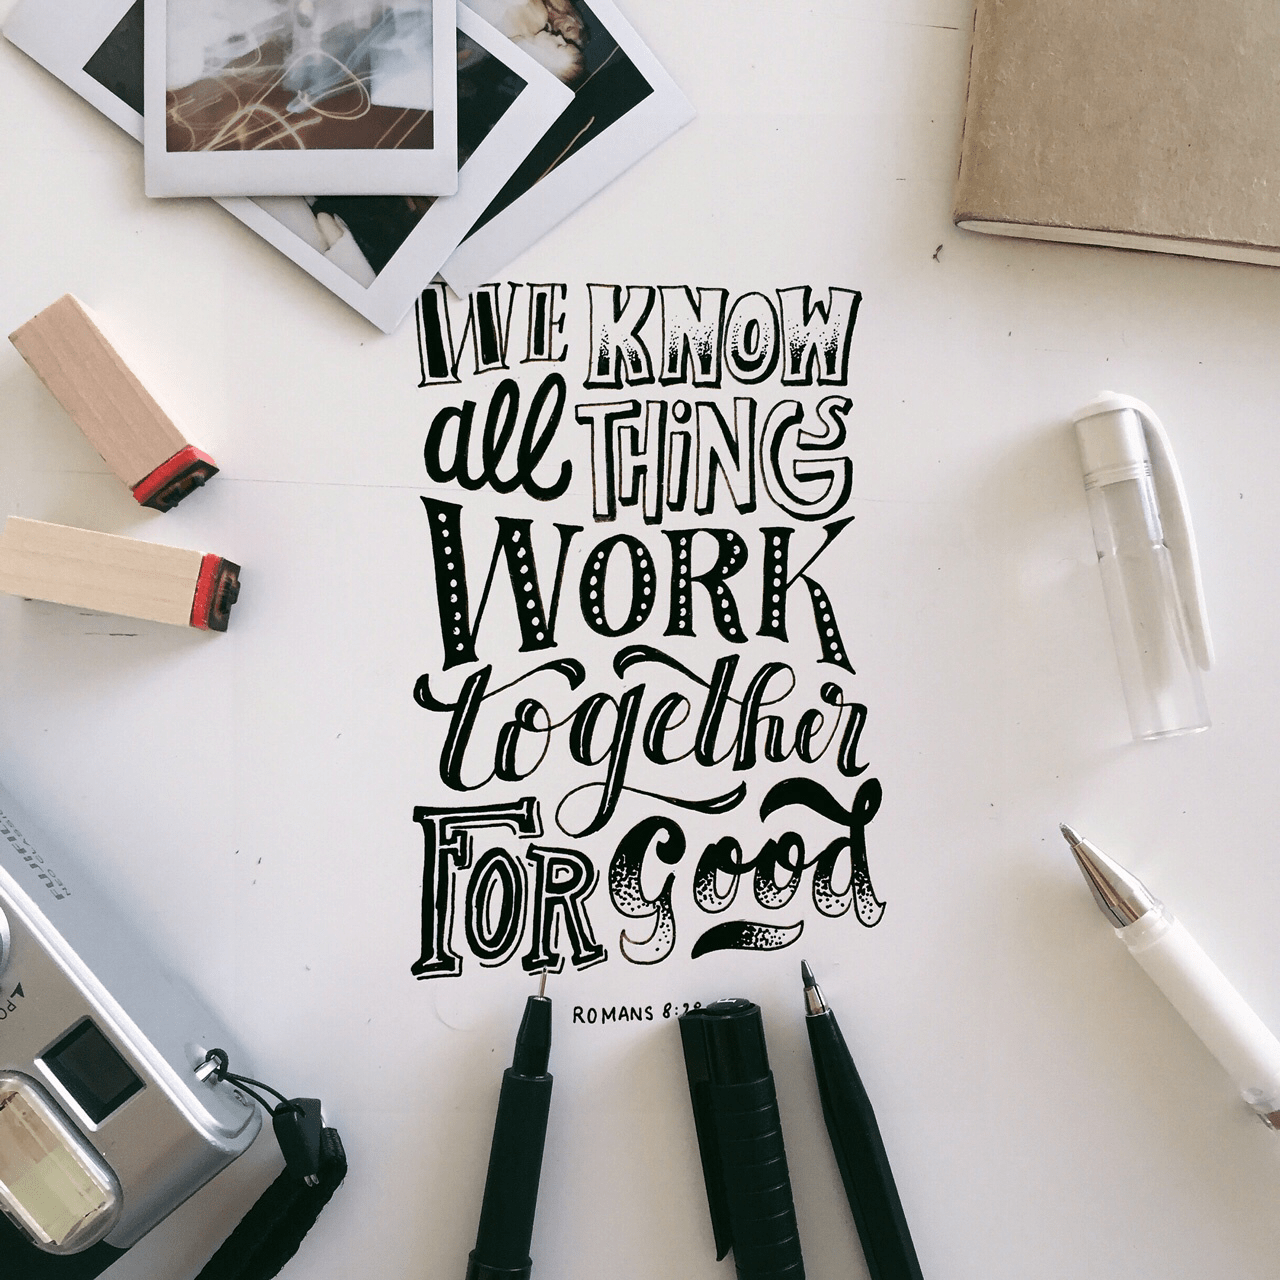 We know all things work together for good Romans 8:28